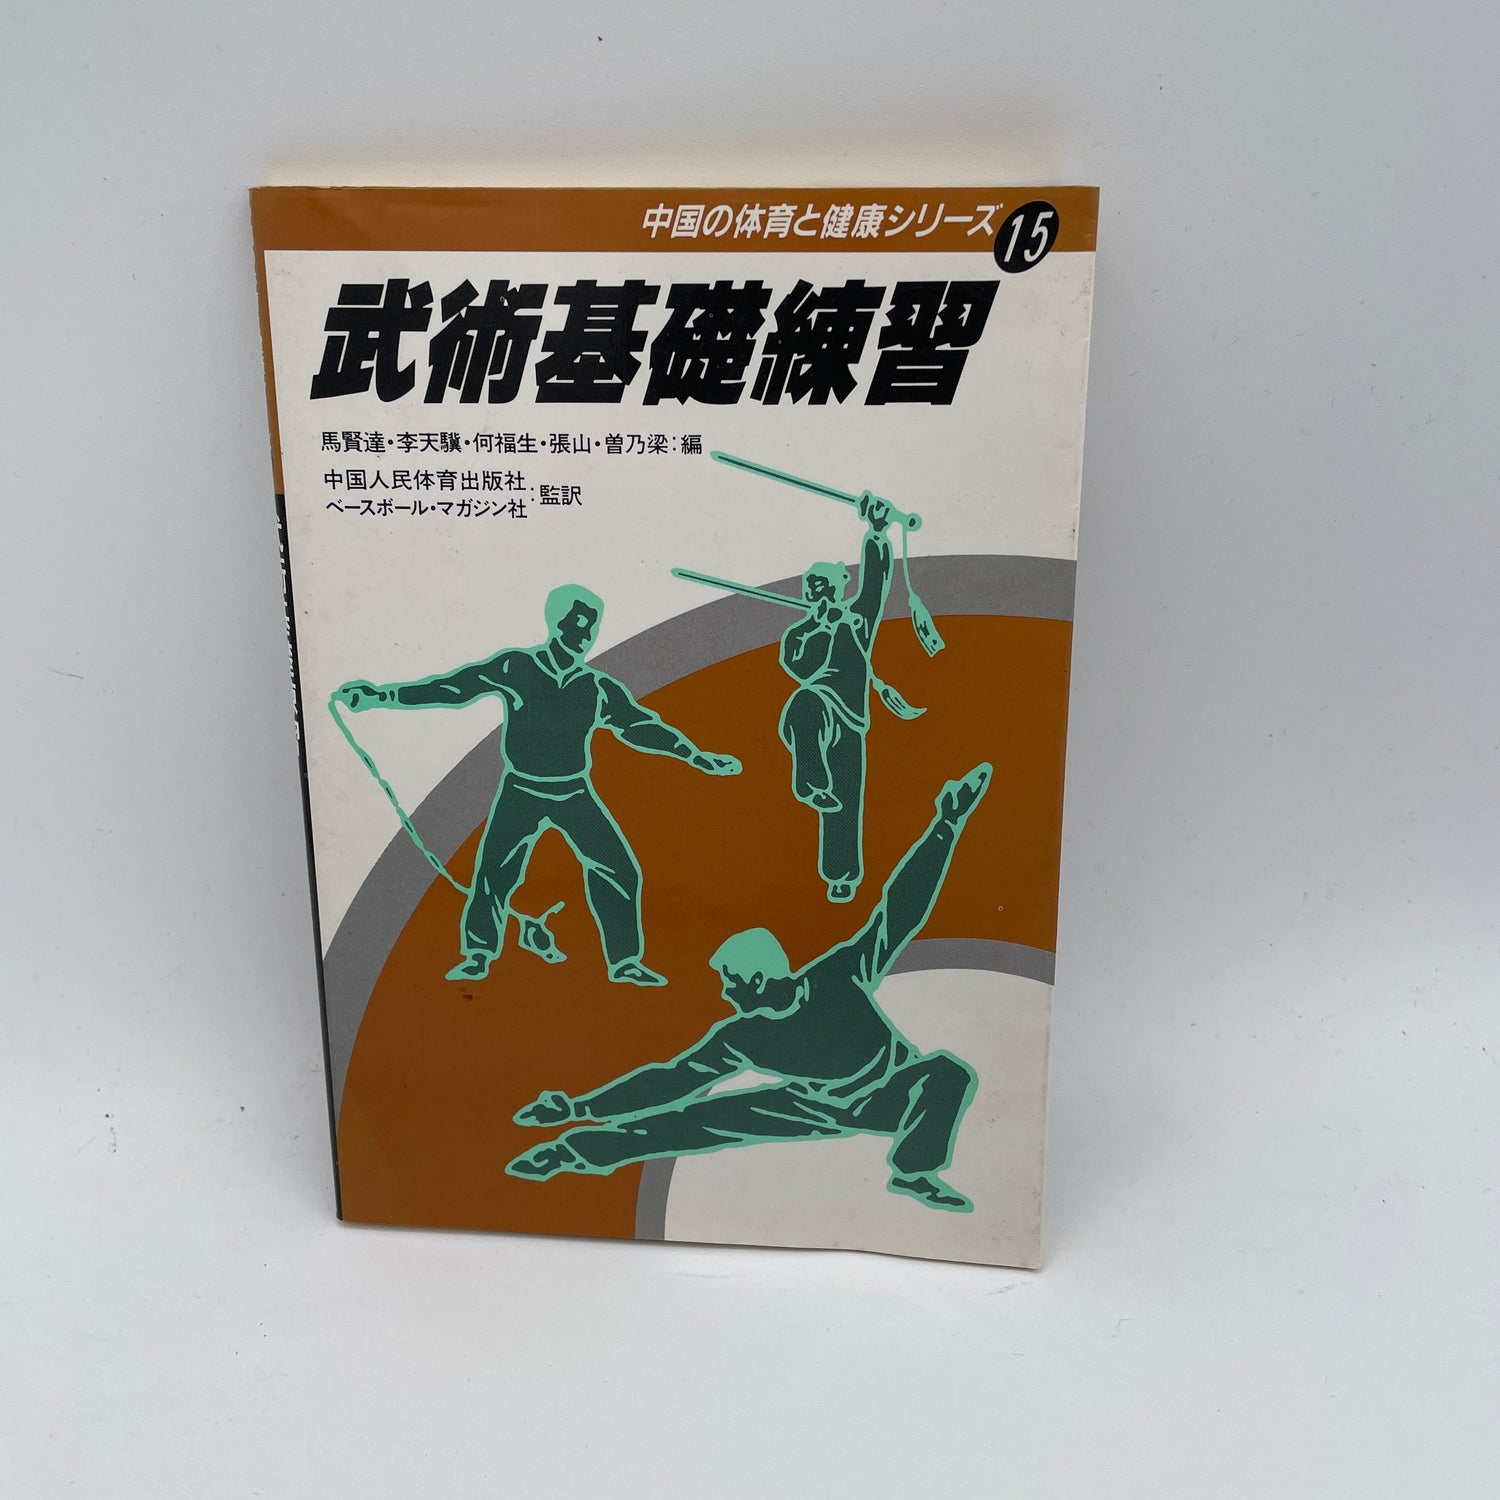 Bujutsu Foundation Practice: Chinese Physical Education & Health Series #15 Book (Preowned)